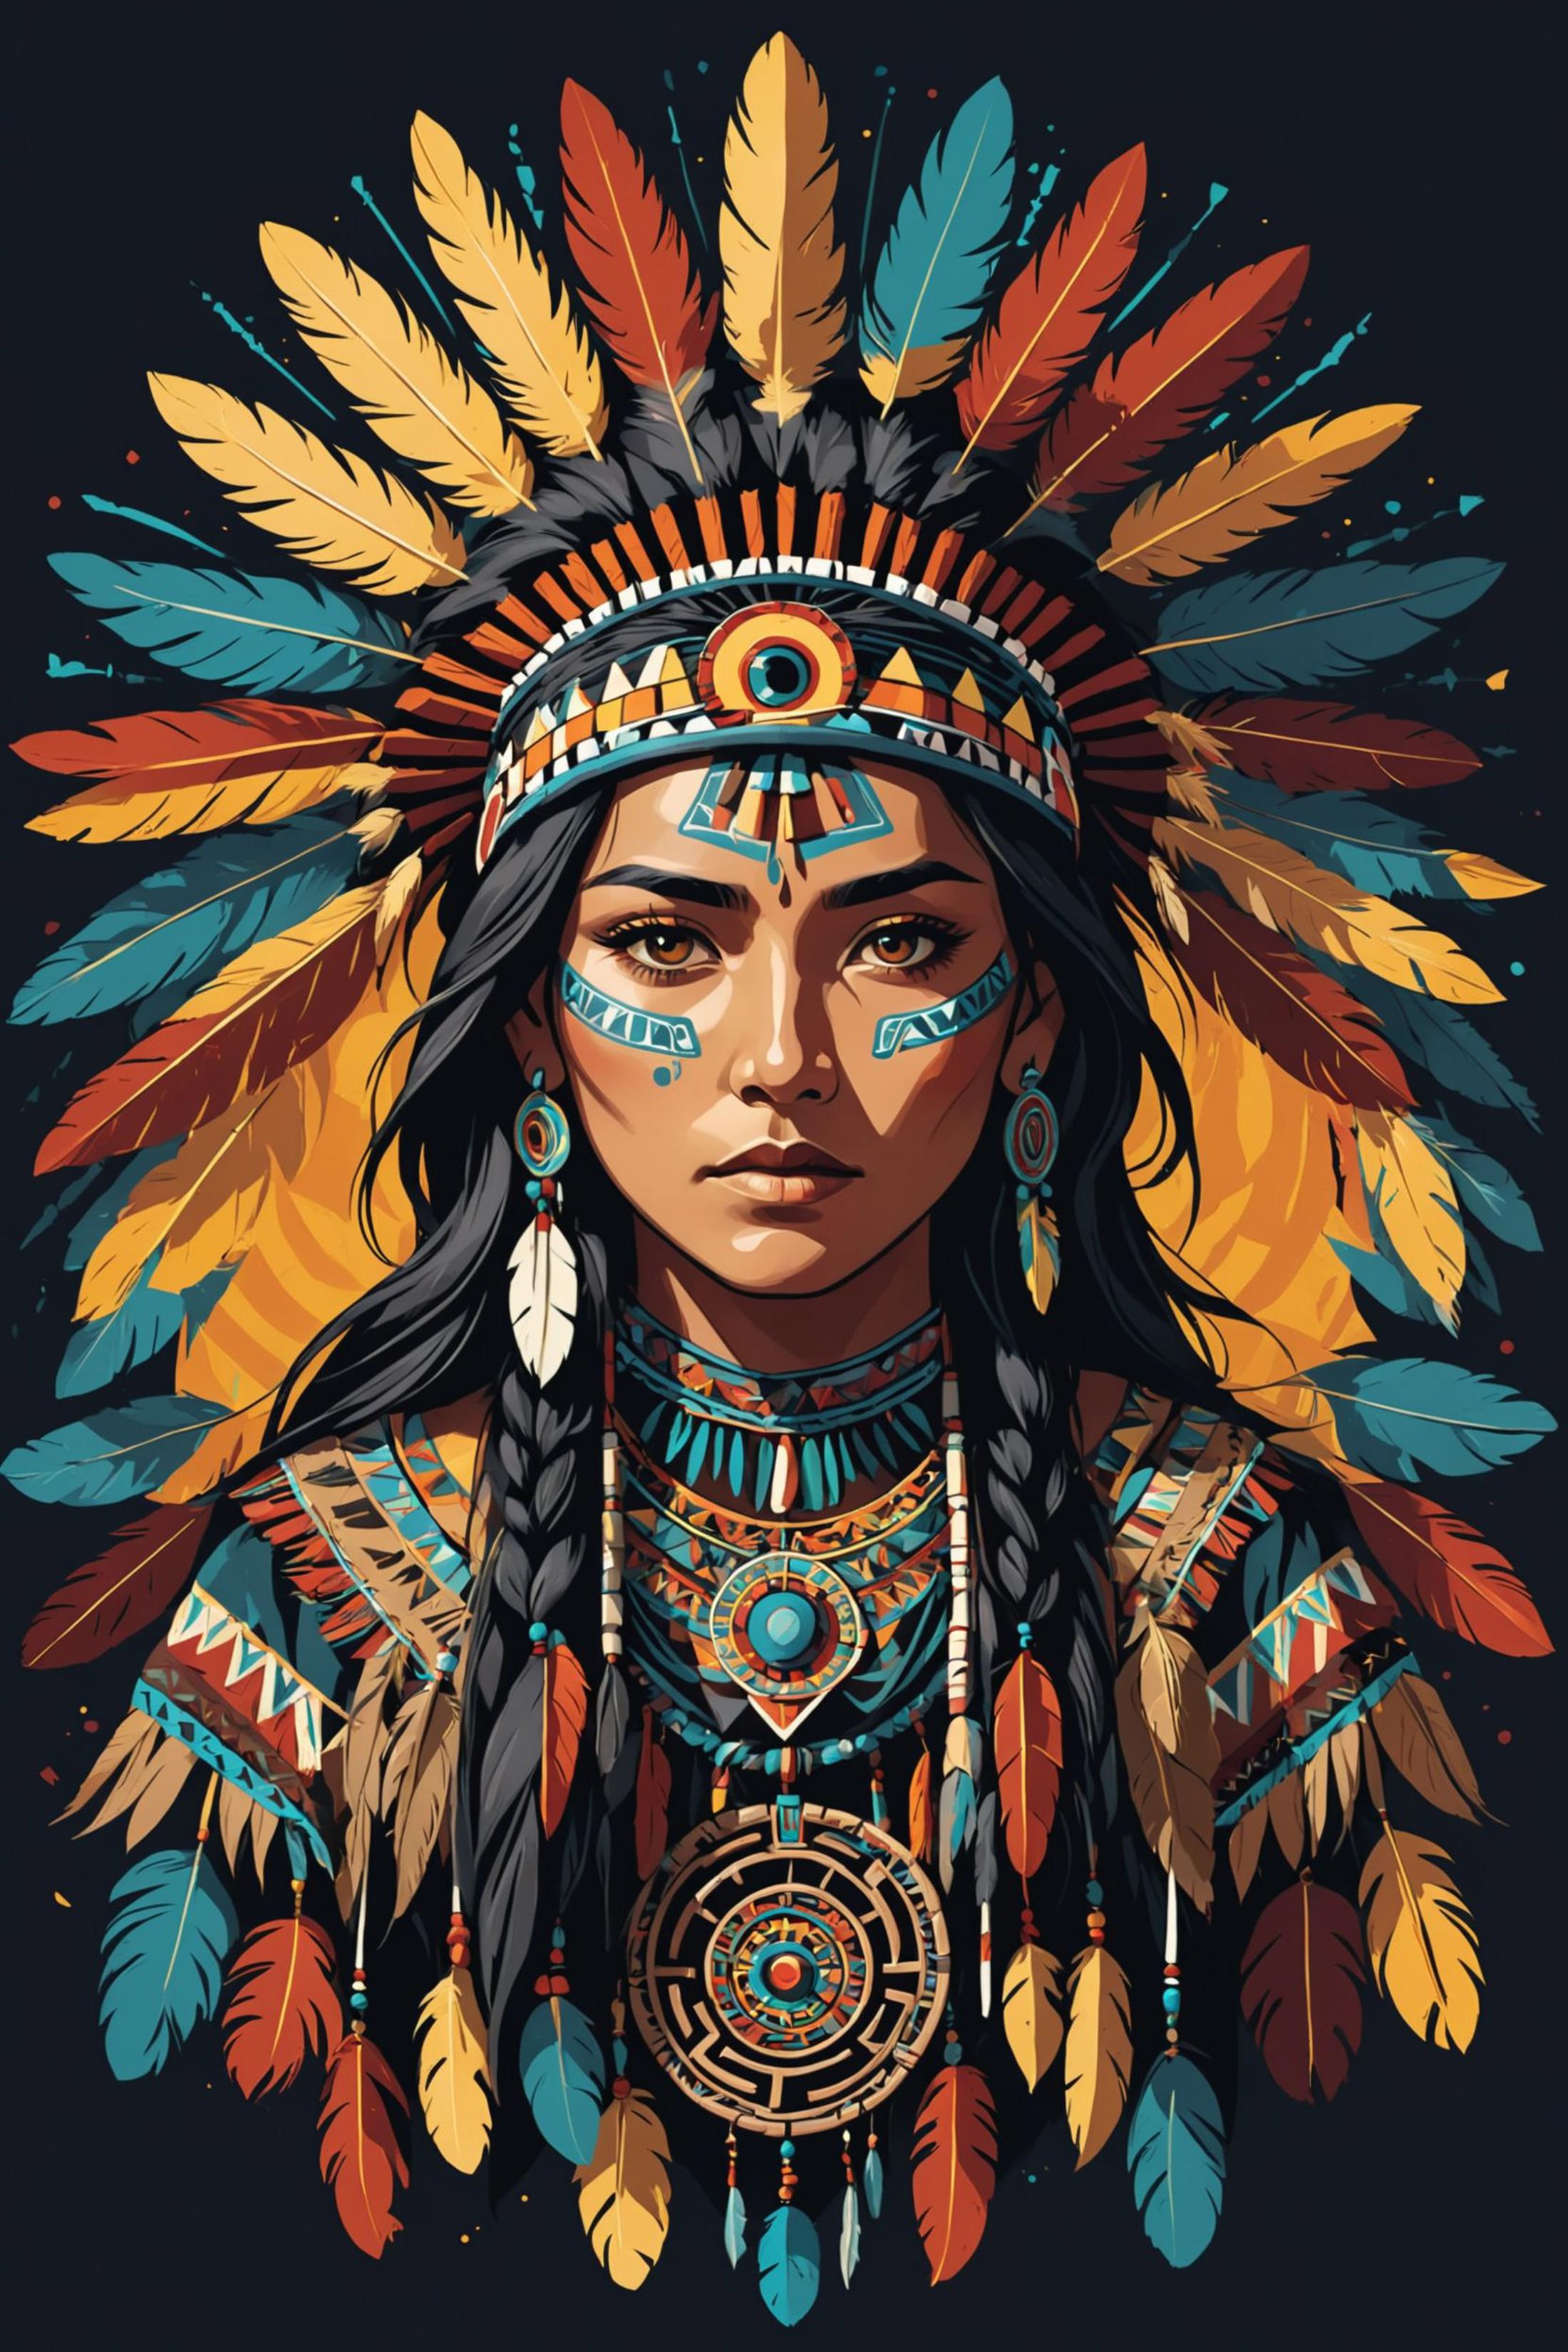 A Native American woman in traditional headdress and clothing.